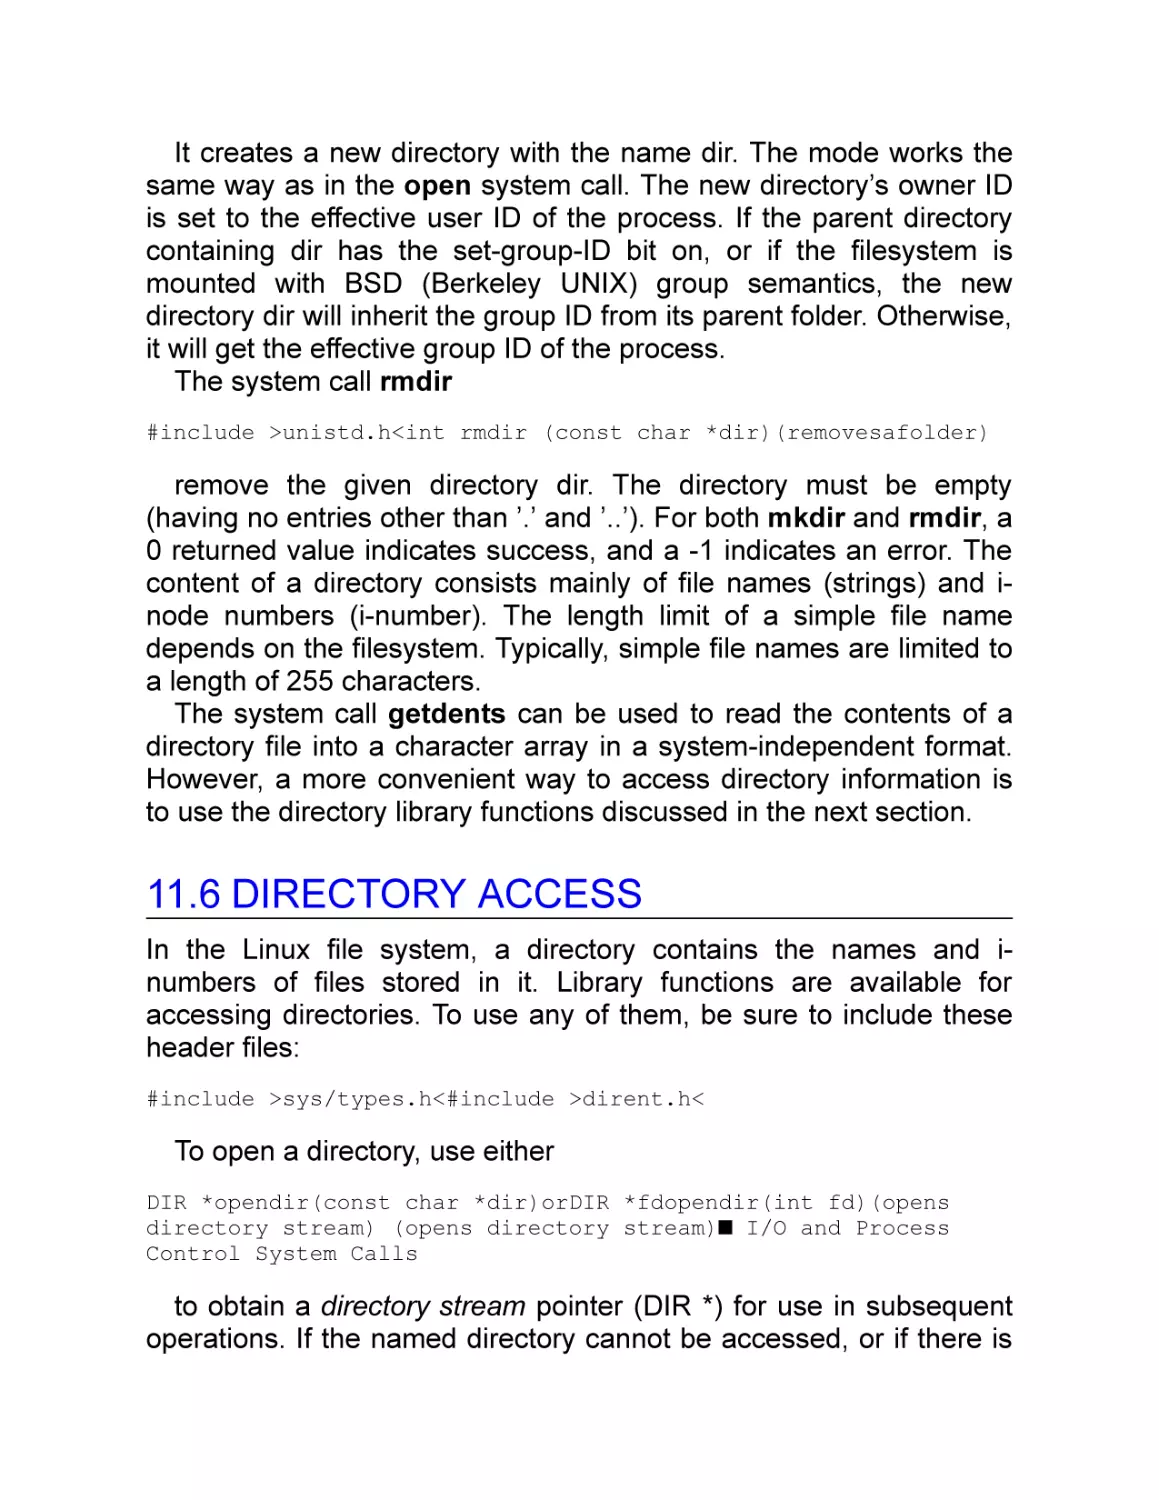 11.6 Directory Access